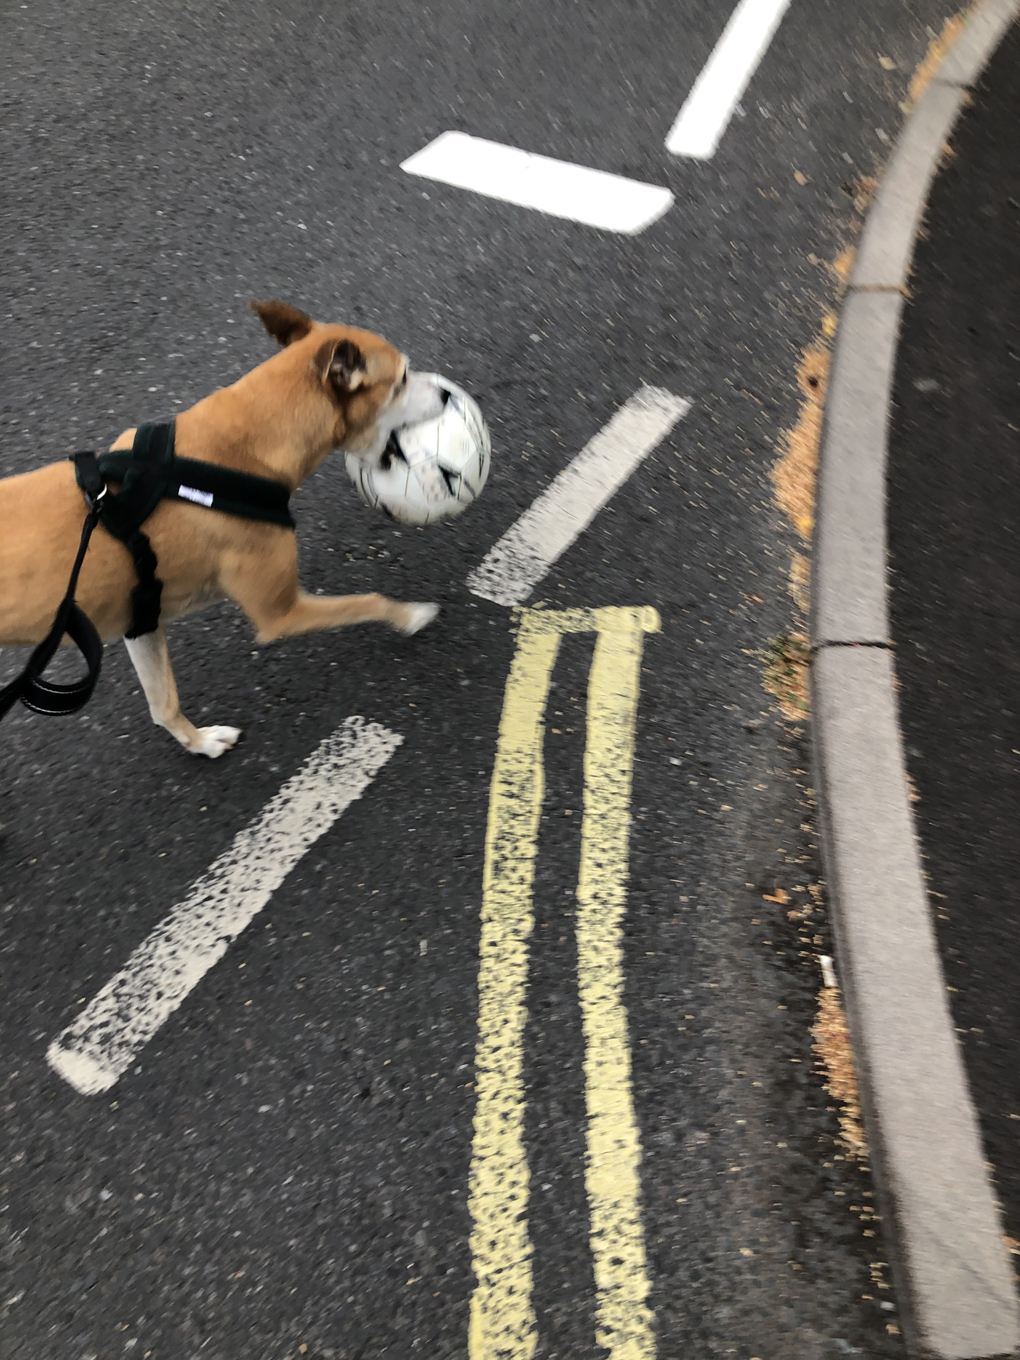 A dog carrying a stolen football in her mouth